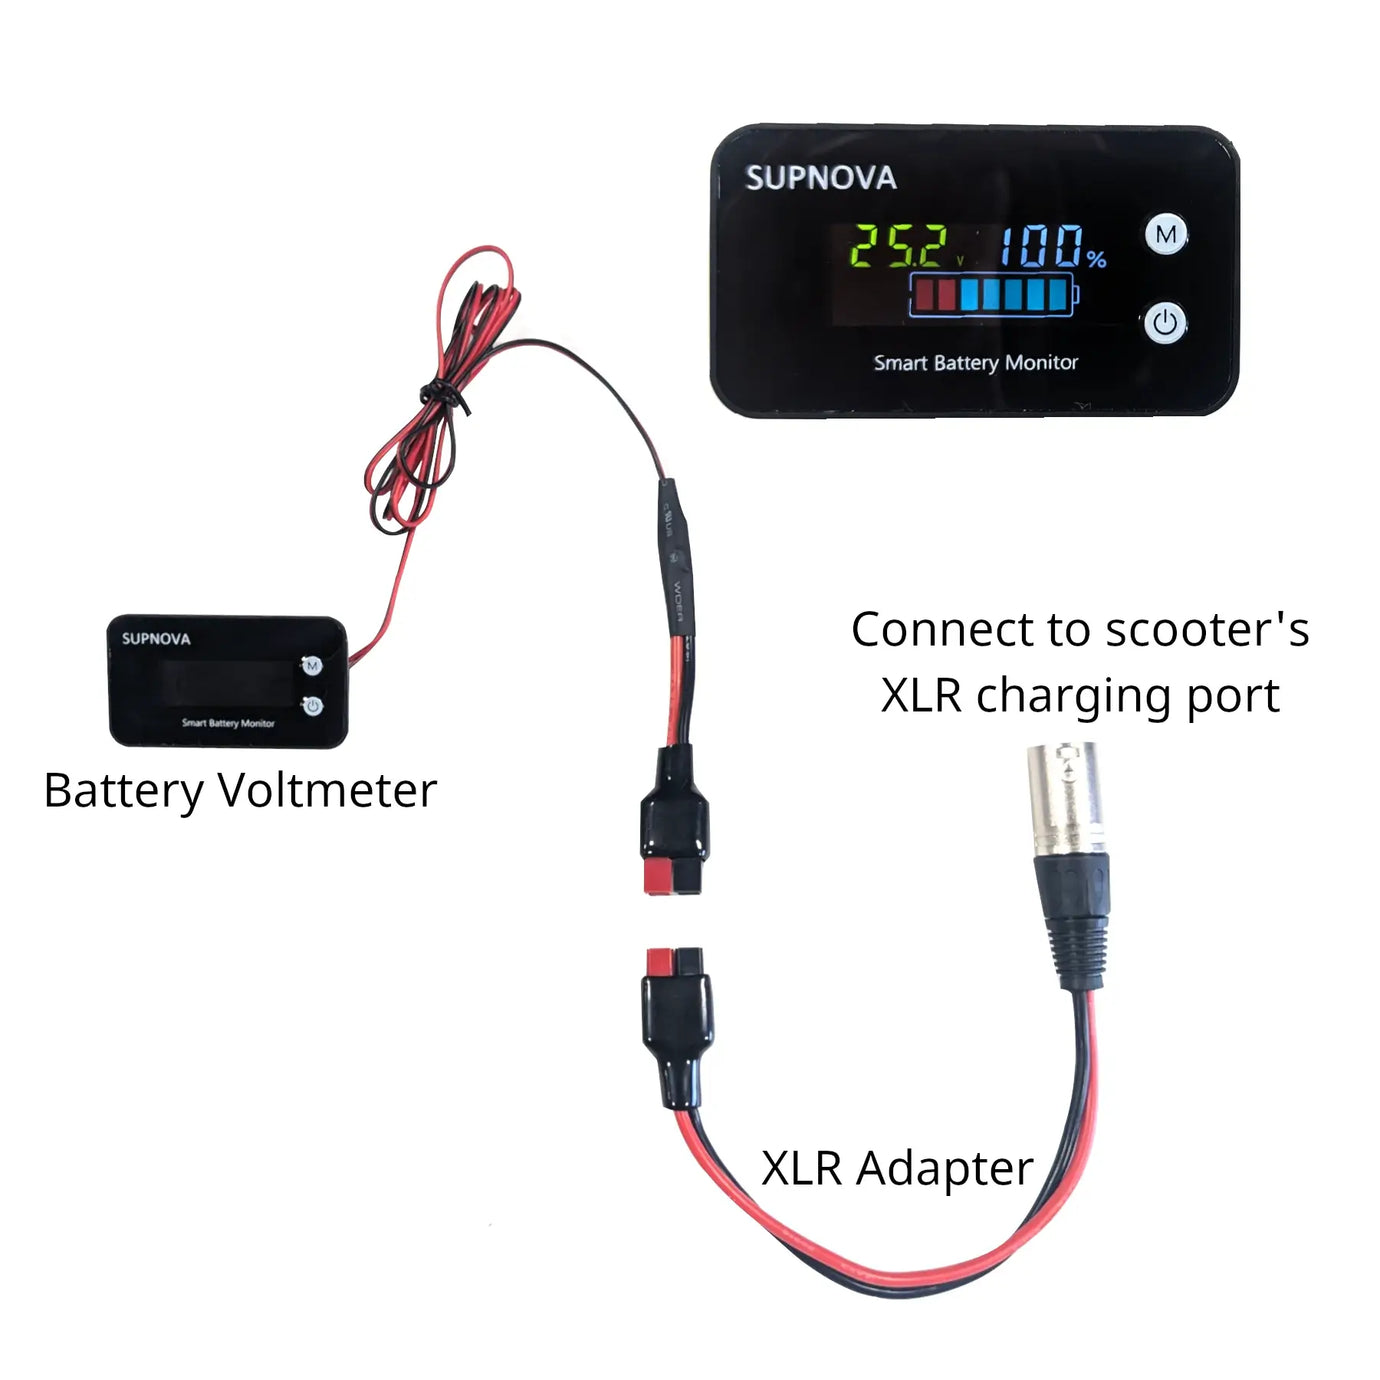 12V 20Ah - Mobility Scooter Upgrade Kit - LiFePO4 Battery